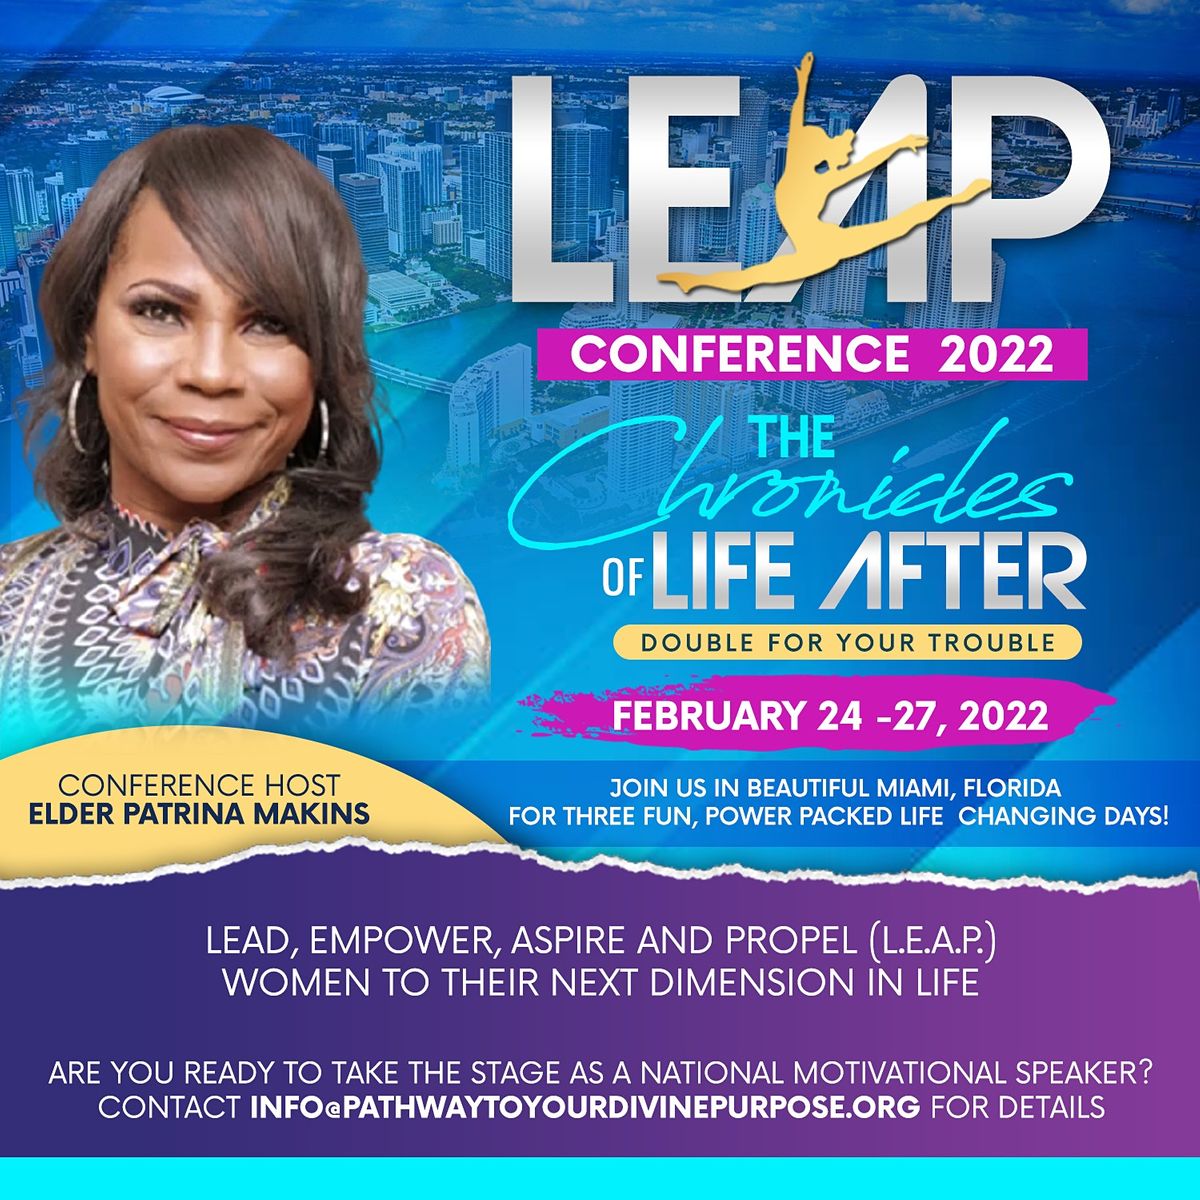 LEAP Women's Conference 2022 "Double for Your Trouble